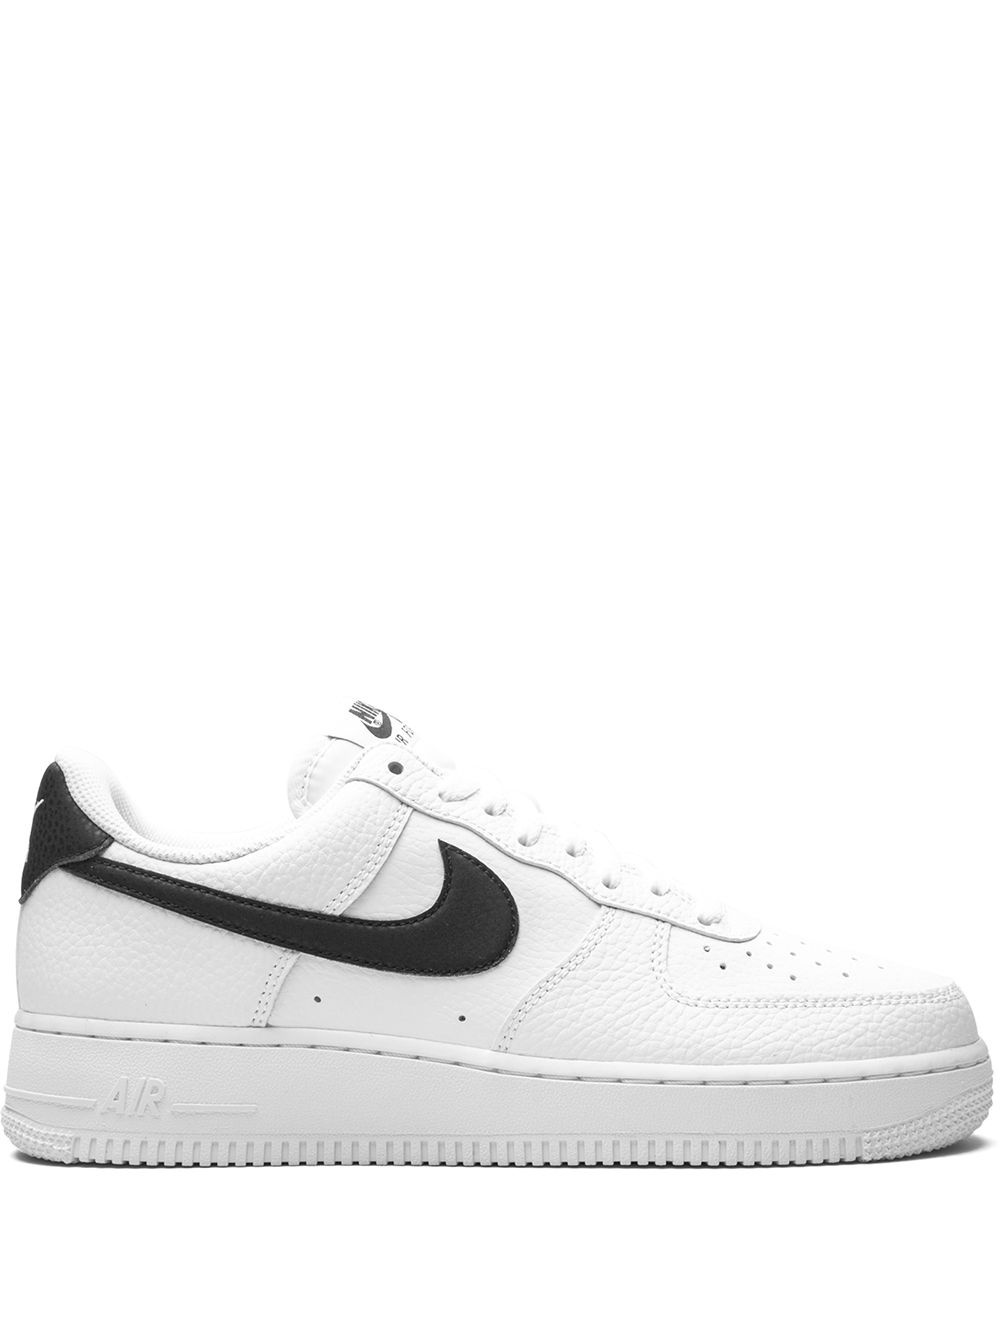 Air Force 1 Low '07 "White/Black" sneakers - 1